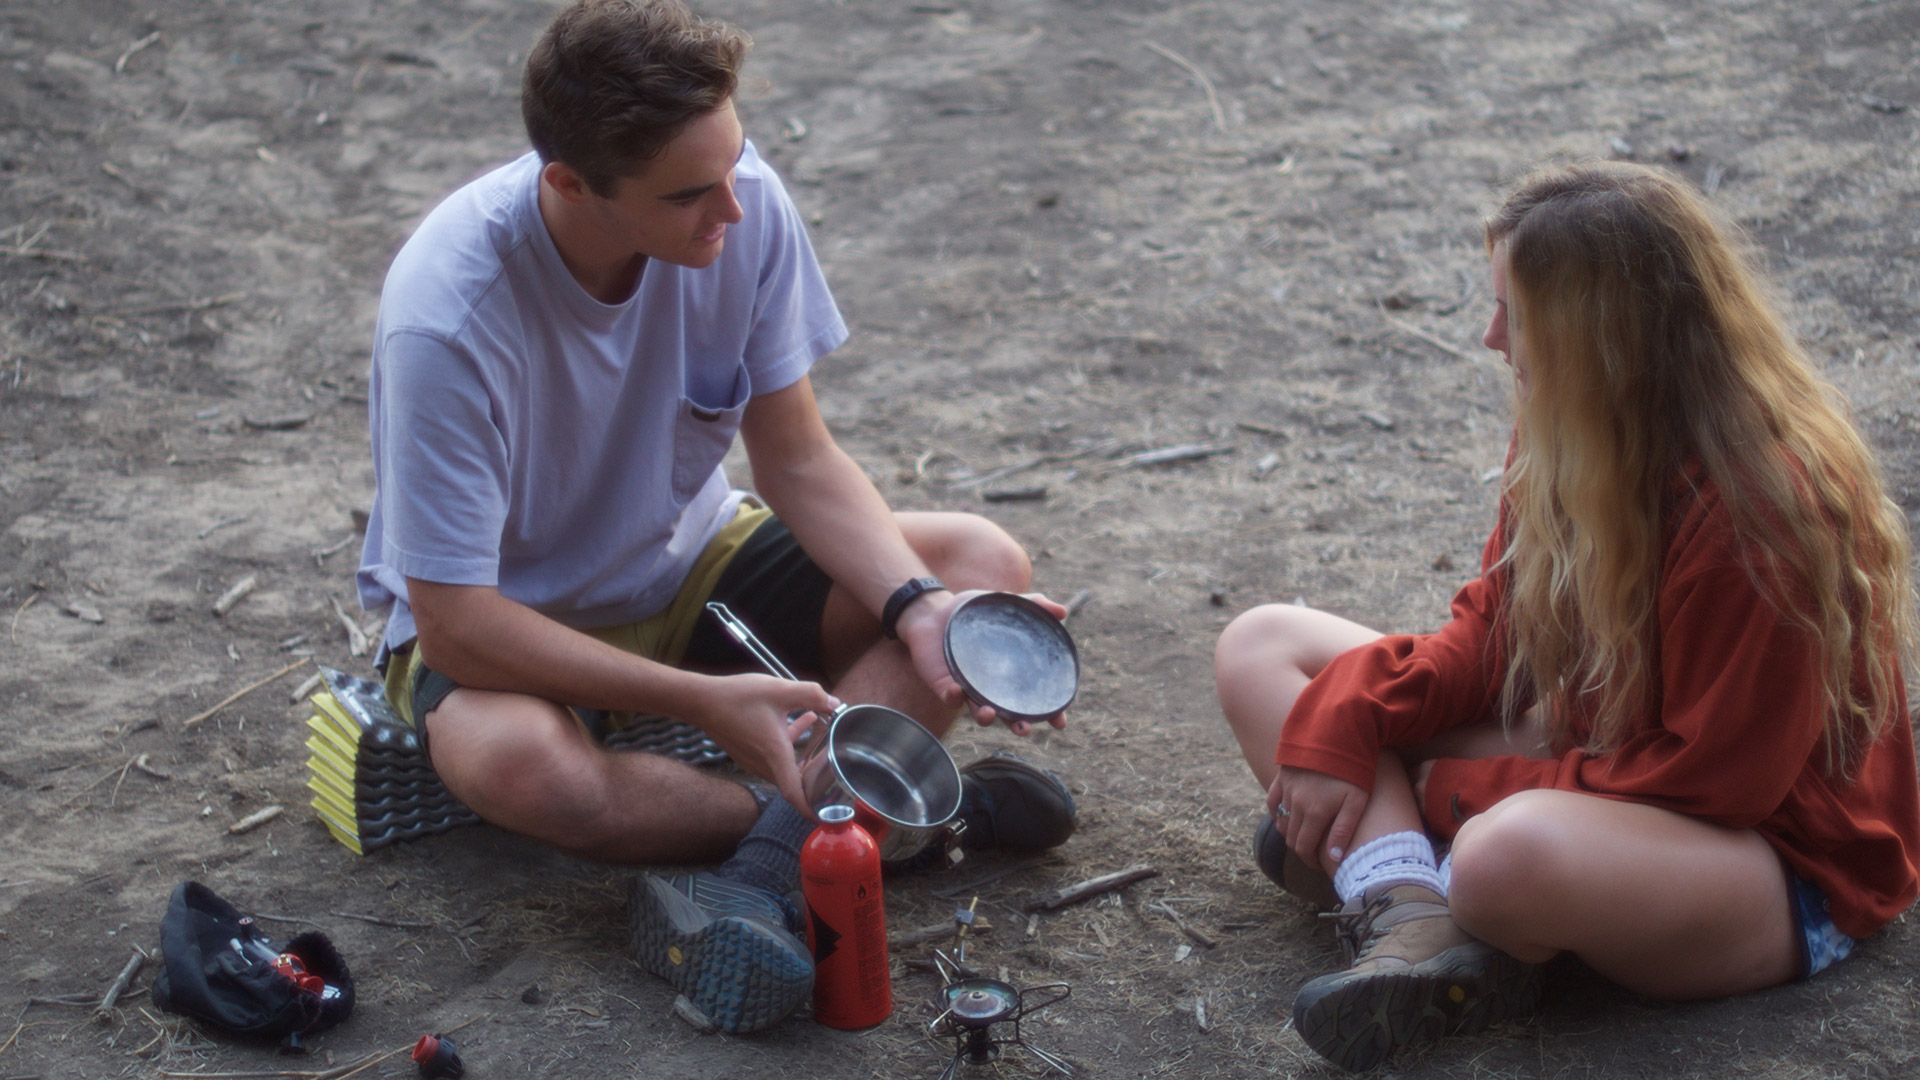 Camping and Cooking:
“Cooking with a backpacking stove is easy and fun, but only if you have everything prepared. Find a comfortable spot and have everything you need within arms reach because a hot flame and a tiny pot leave little room for error,” Patrick (left) explained to Rebecca (right). 